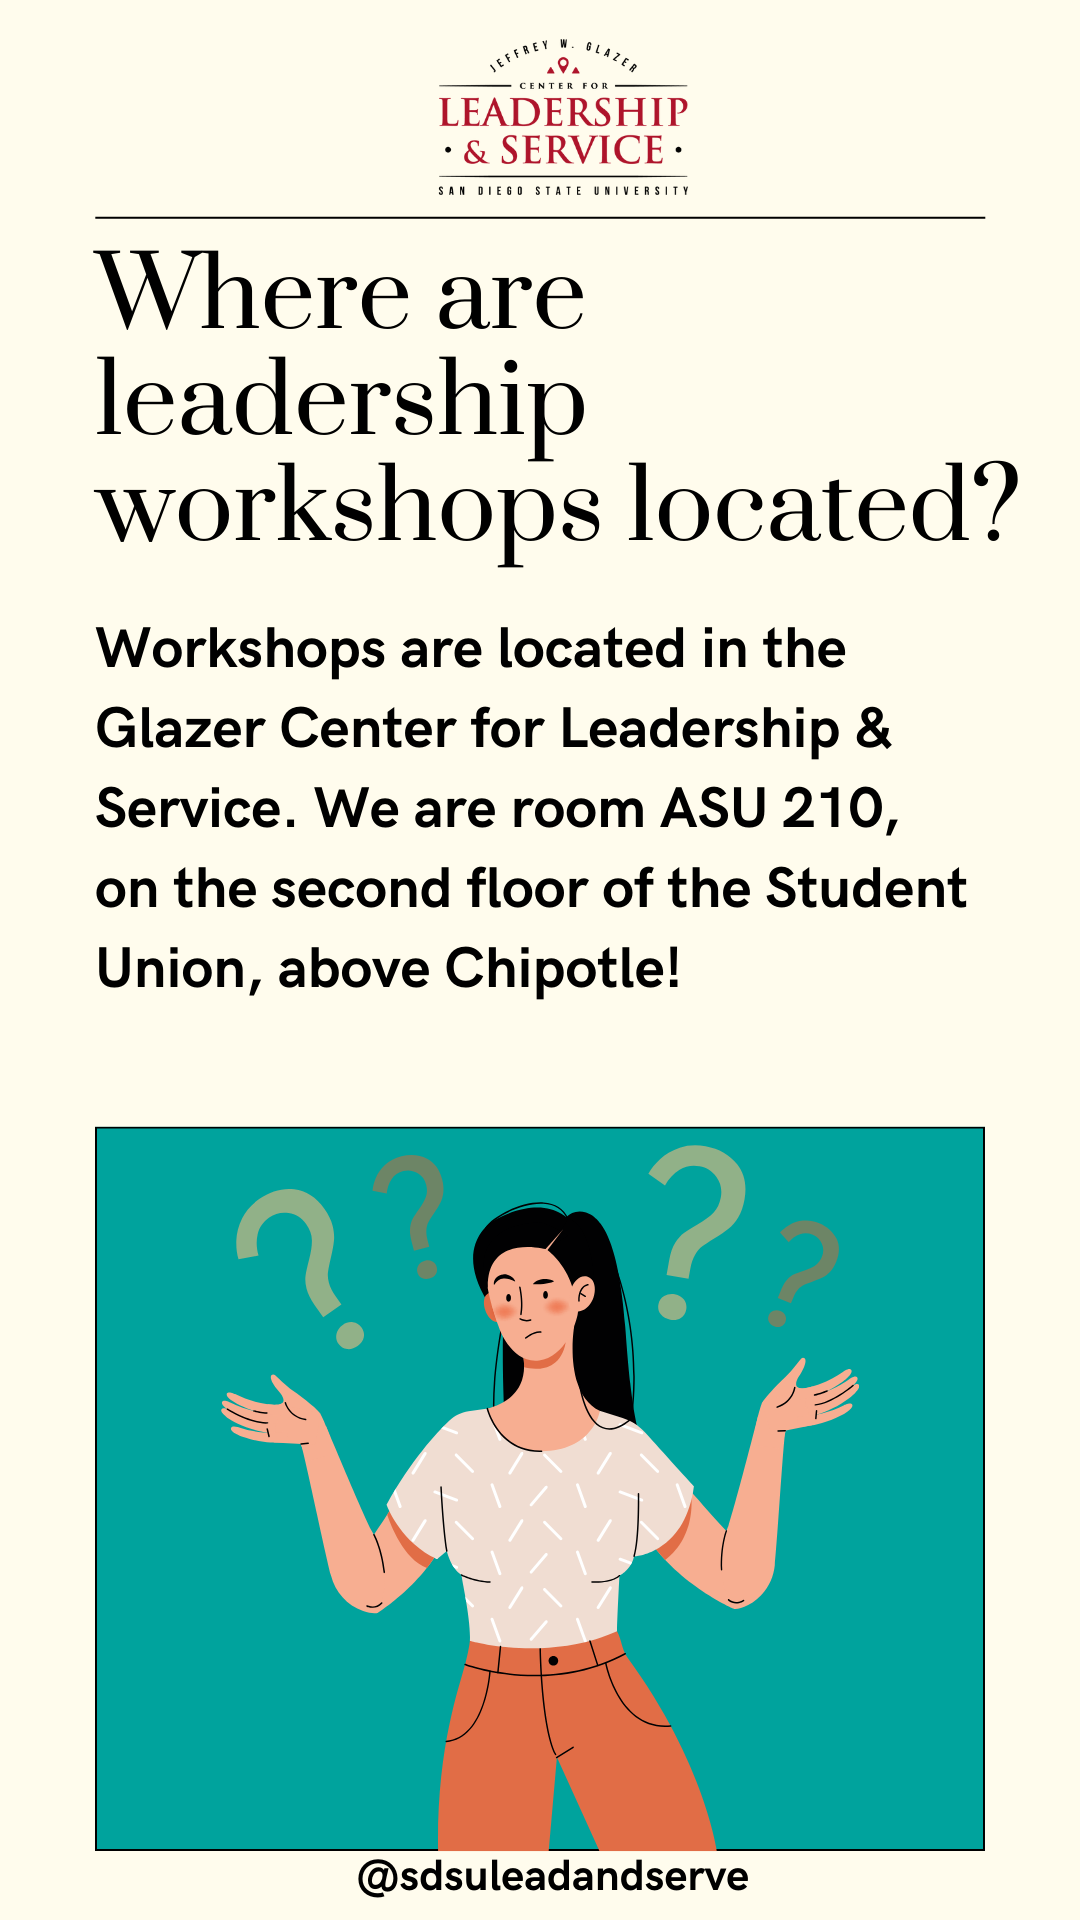 Where are workshops located? Workshops are located in the Glazer Center for Leadership & Service. We are room ASU 210, on the second floor of the Student Union, above Chipotle!